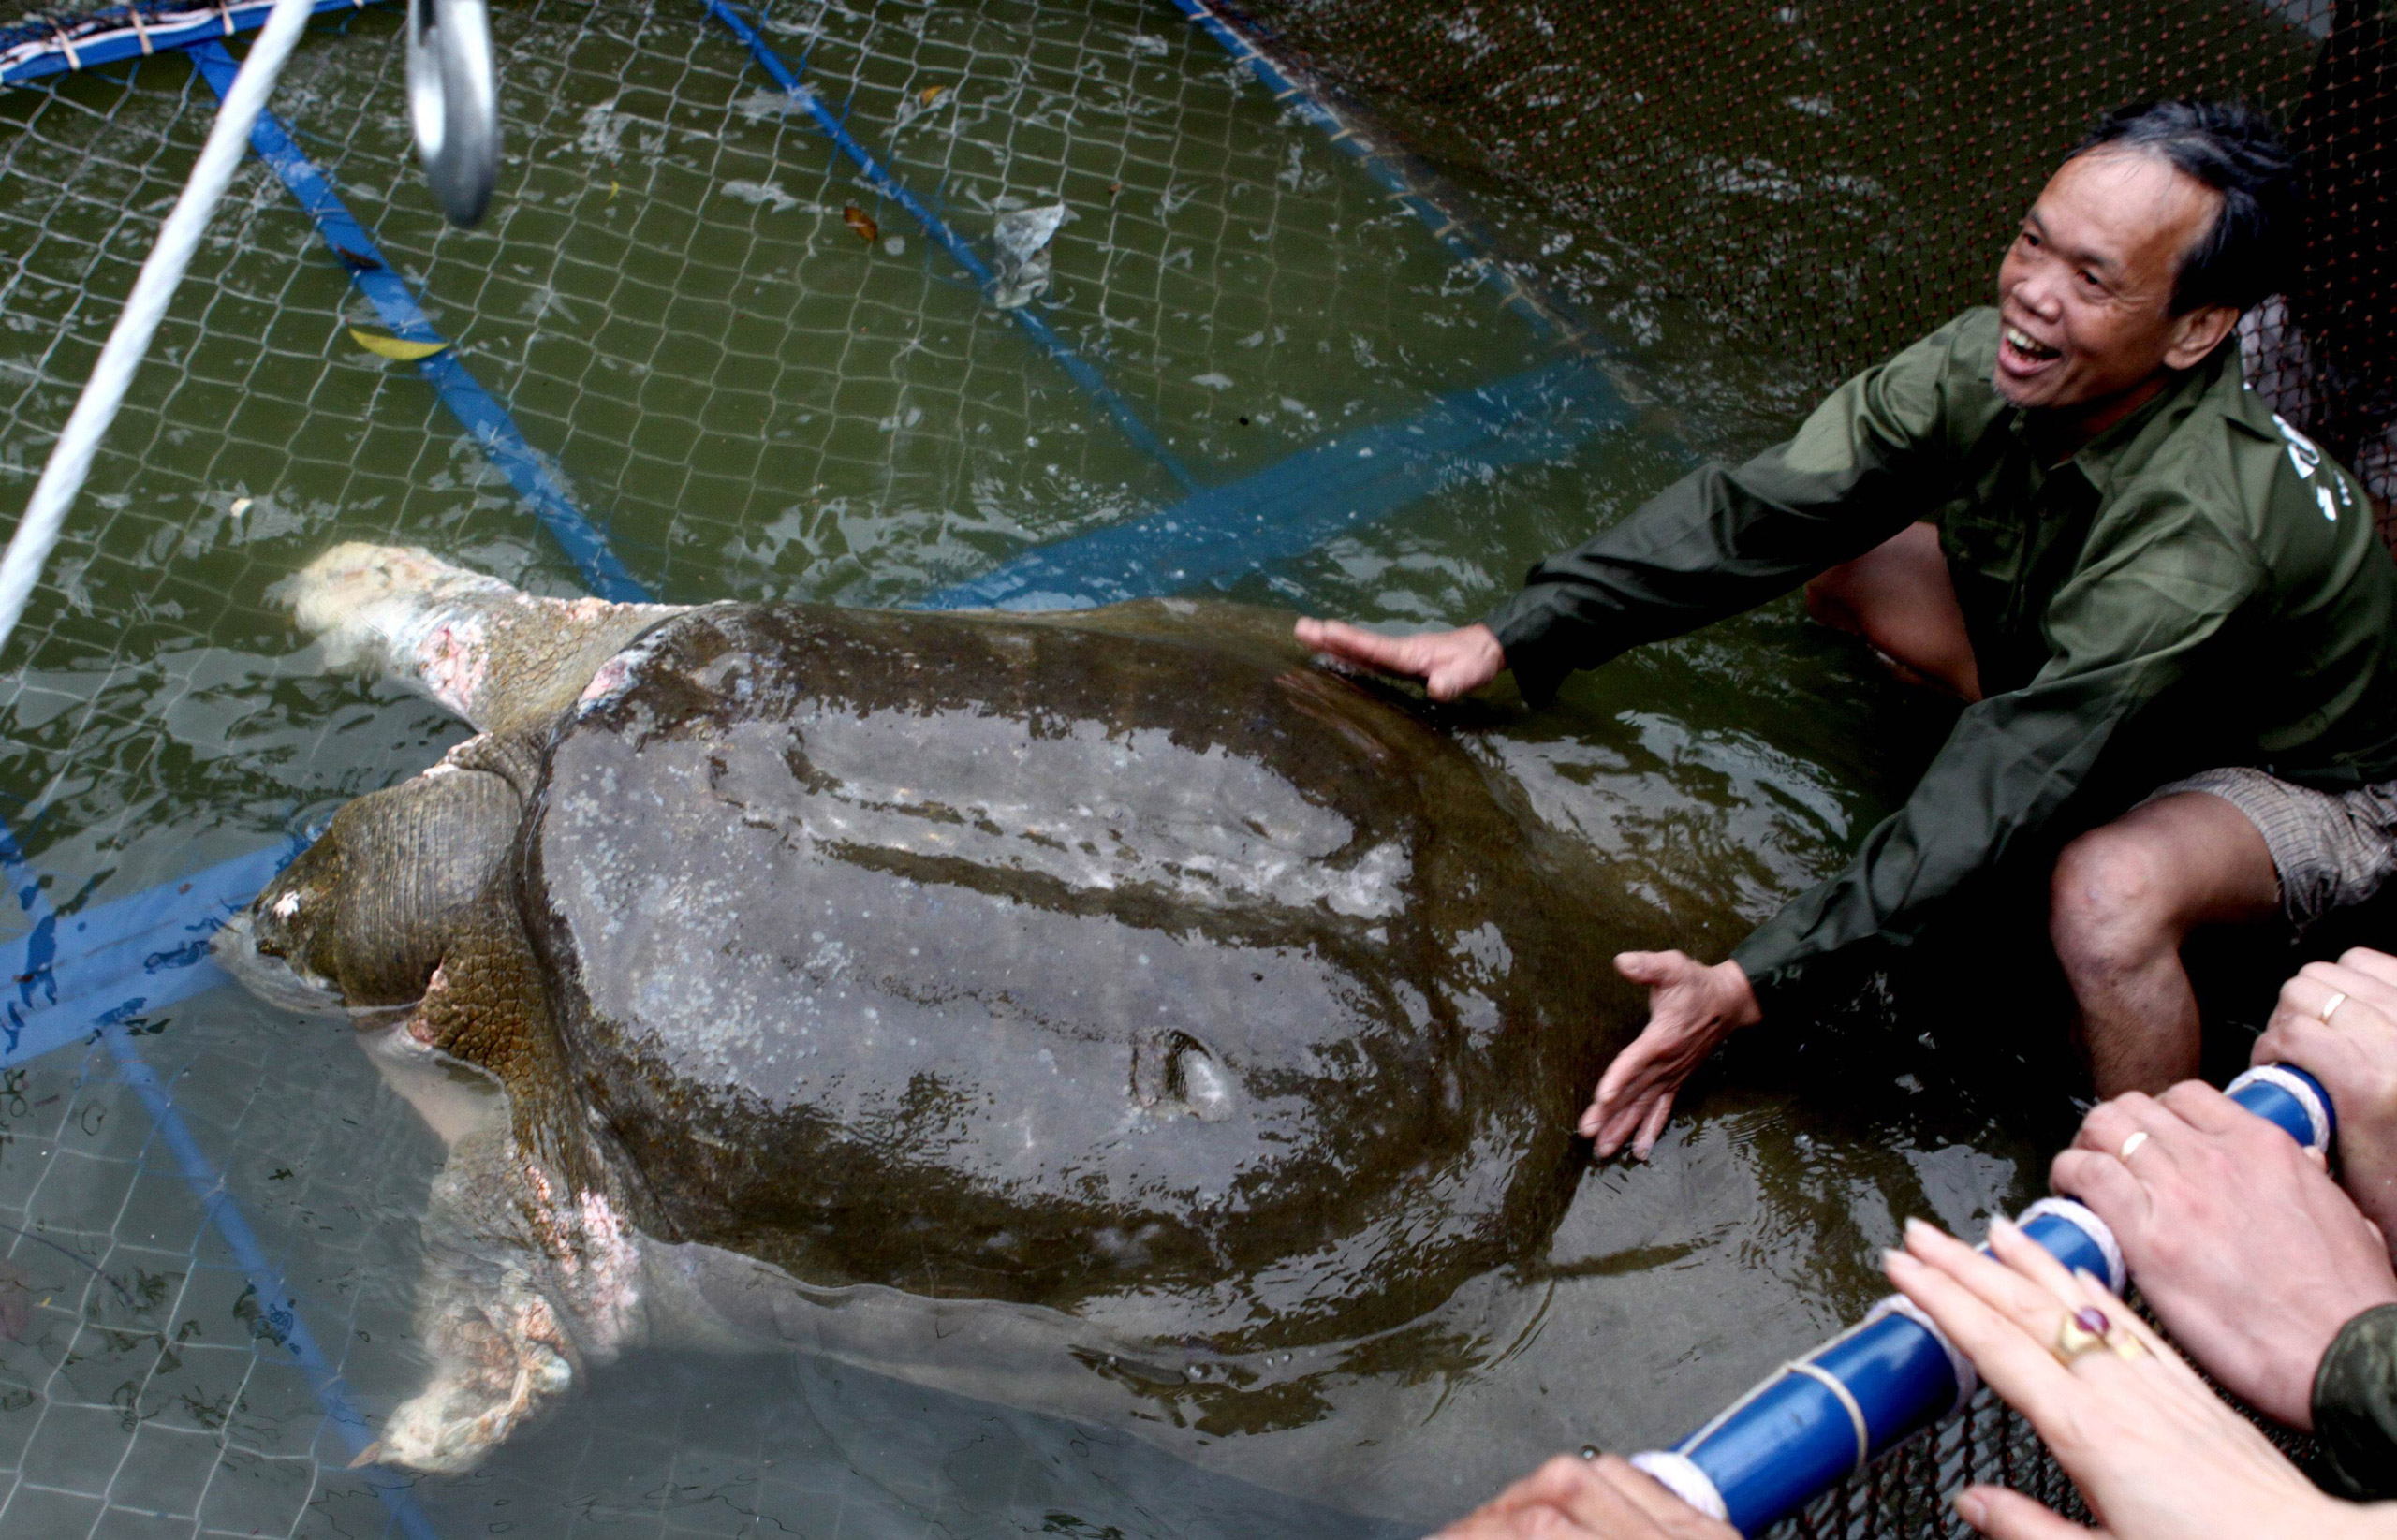 A giant soft-shell turtle (Rafetus swinhoei), considered a sacred symbol of Vietnamese independence, is guided into a cage for a health check at Hoan Kiem lake in Hanoi, on April 3, 2011. (Vietnam News Agency/AFP/Getty Images)